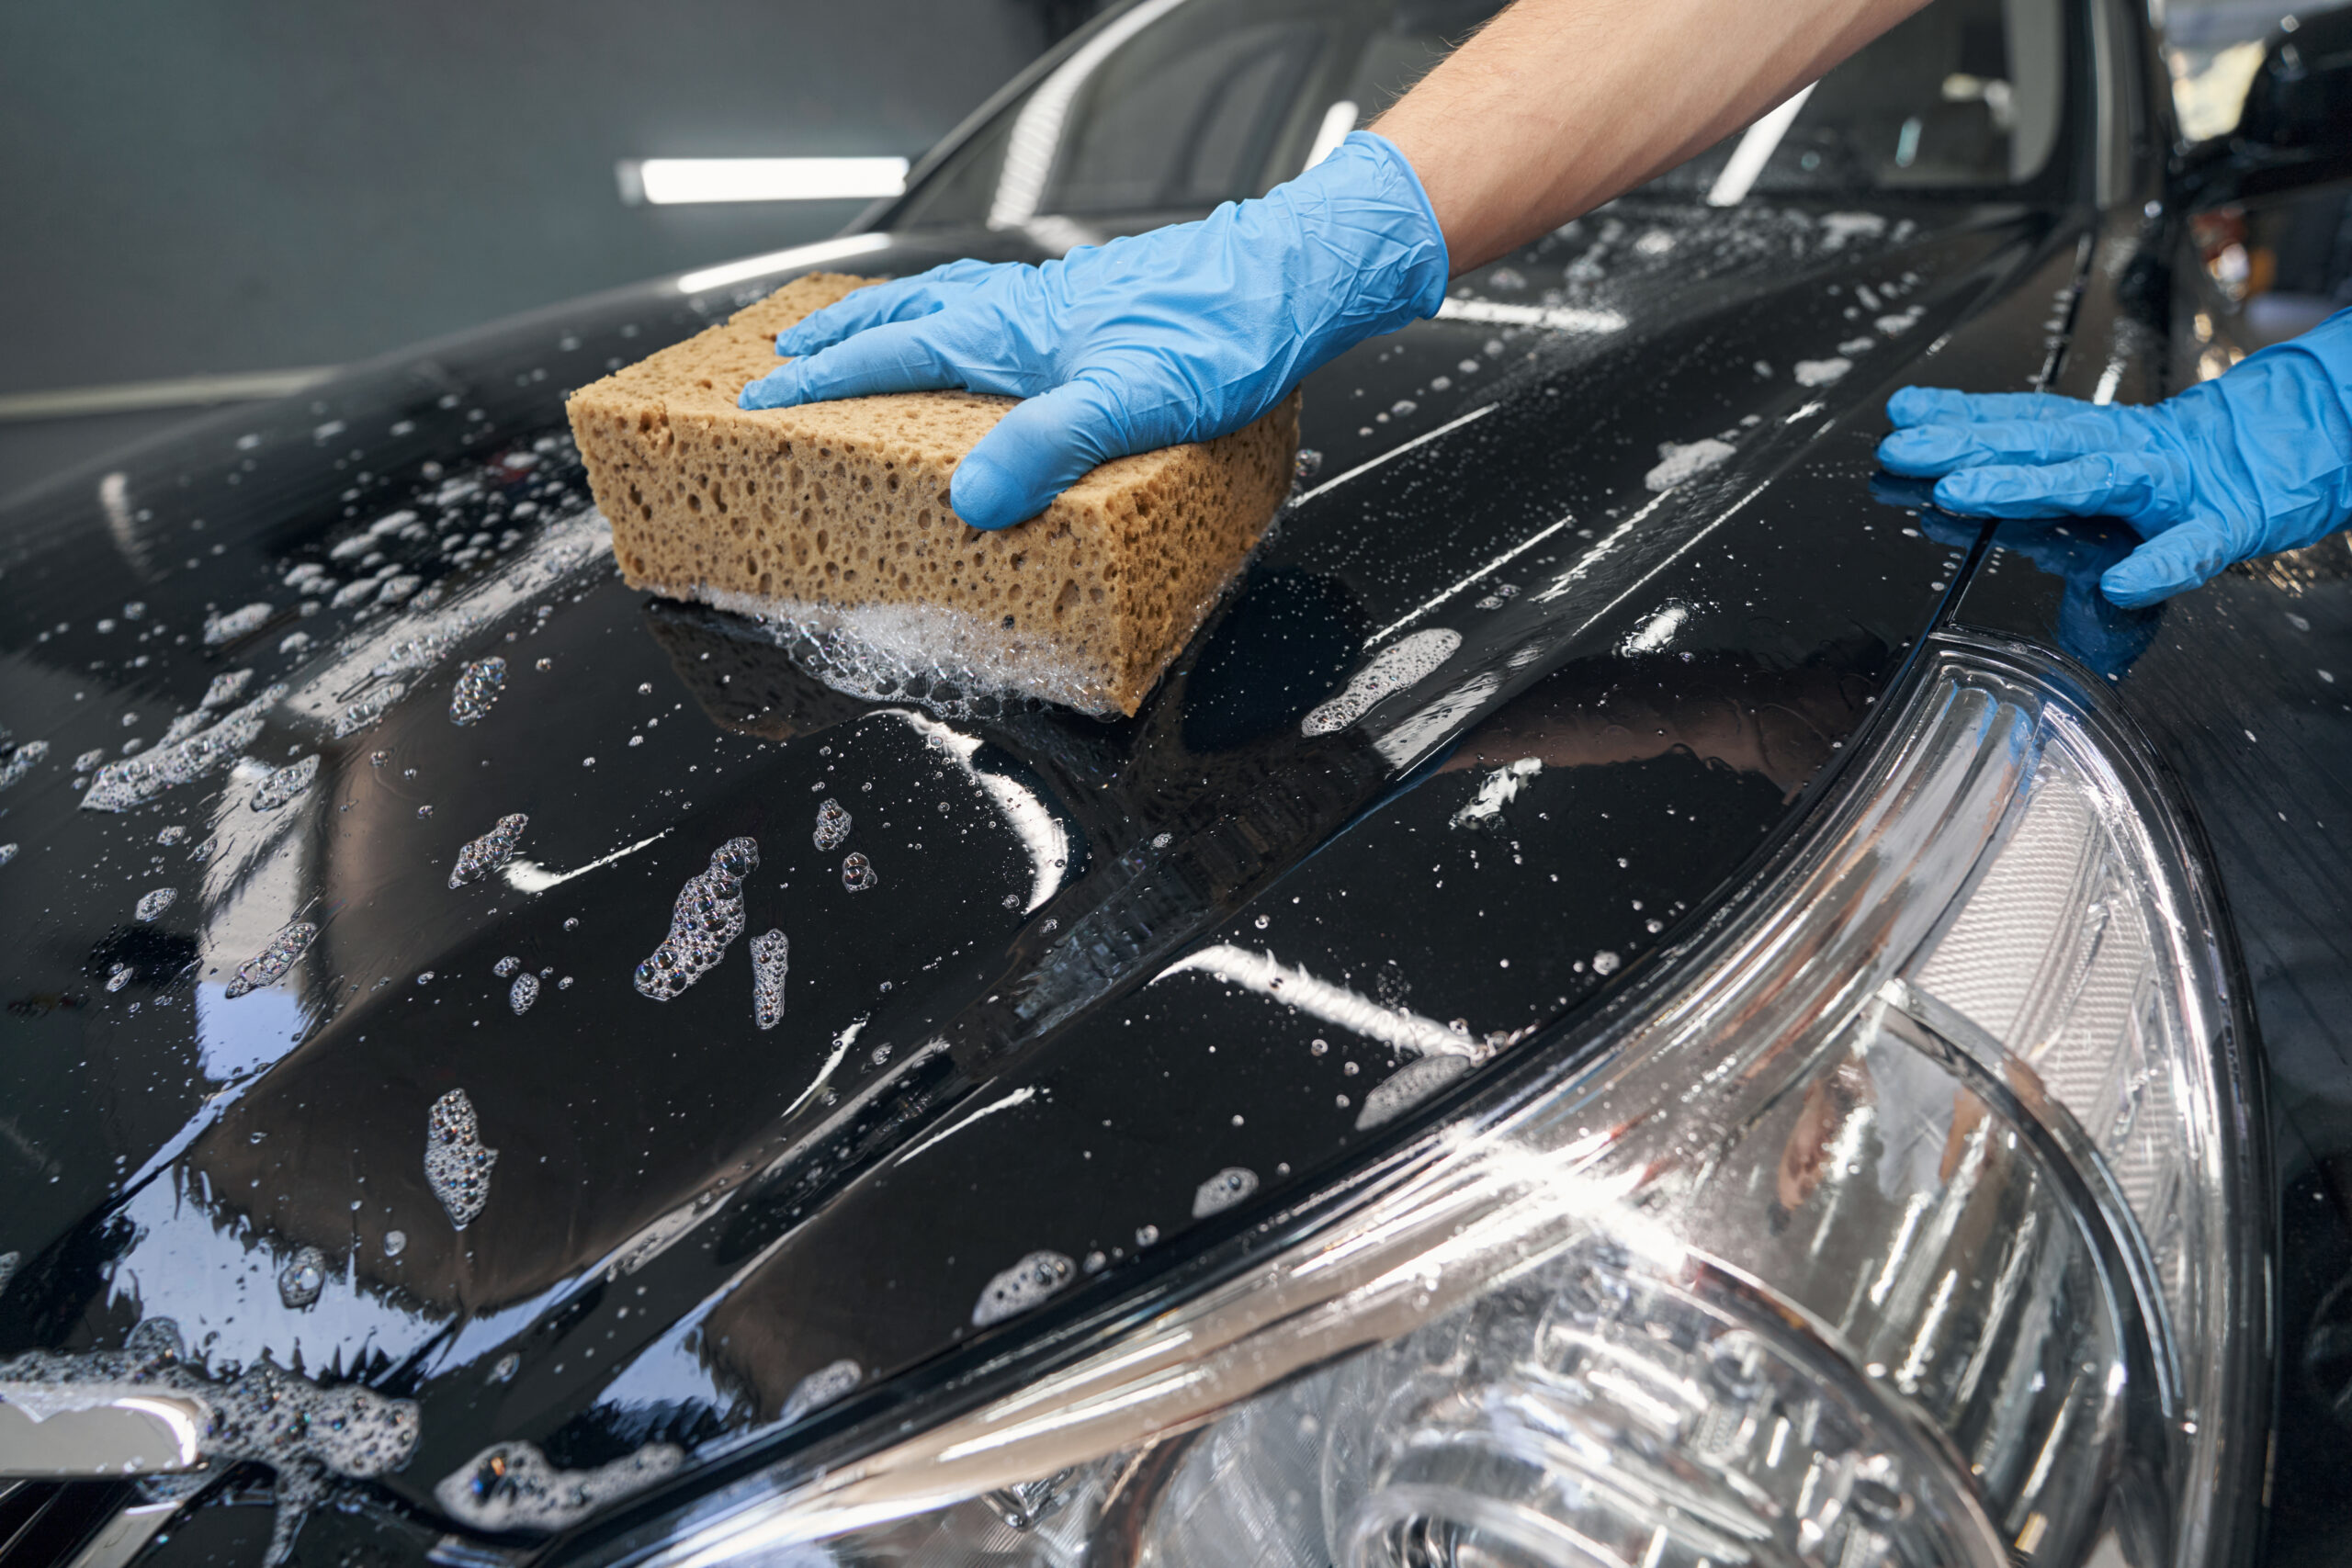 DIY Car Detailing Tips for a Professional Shine